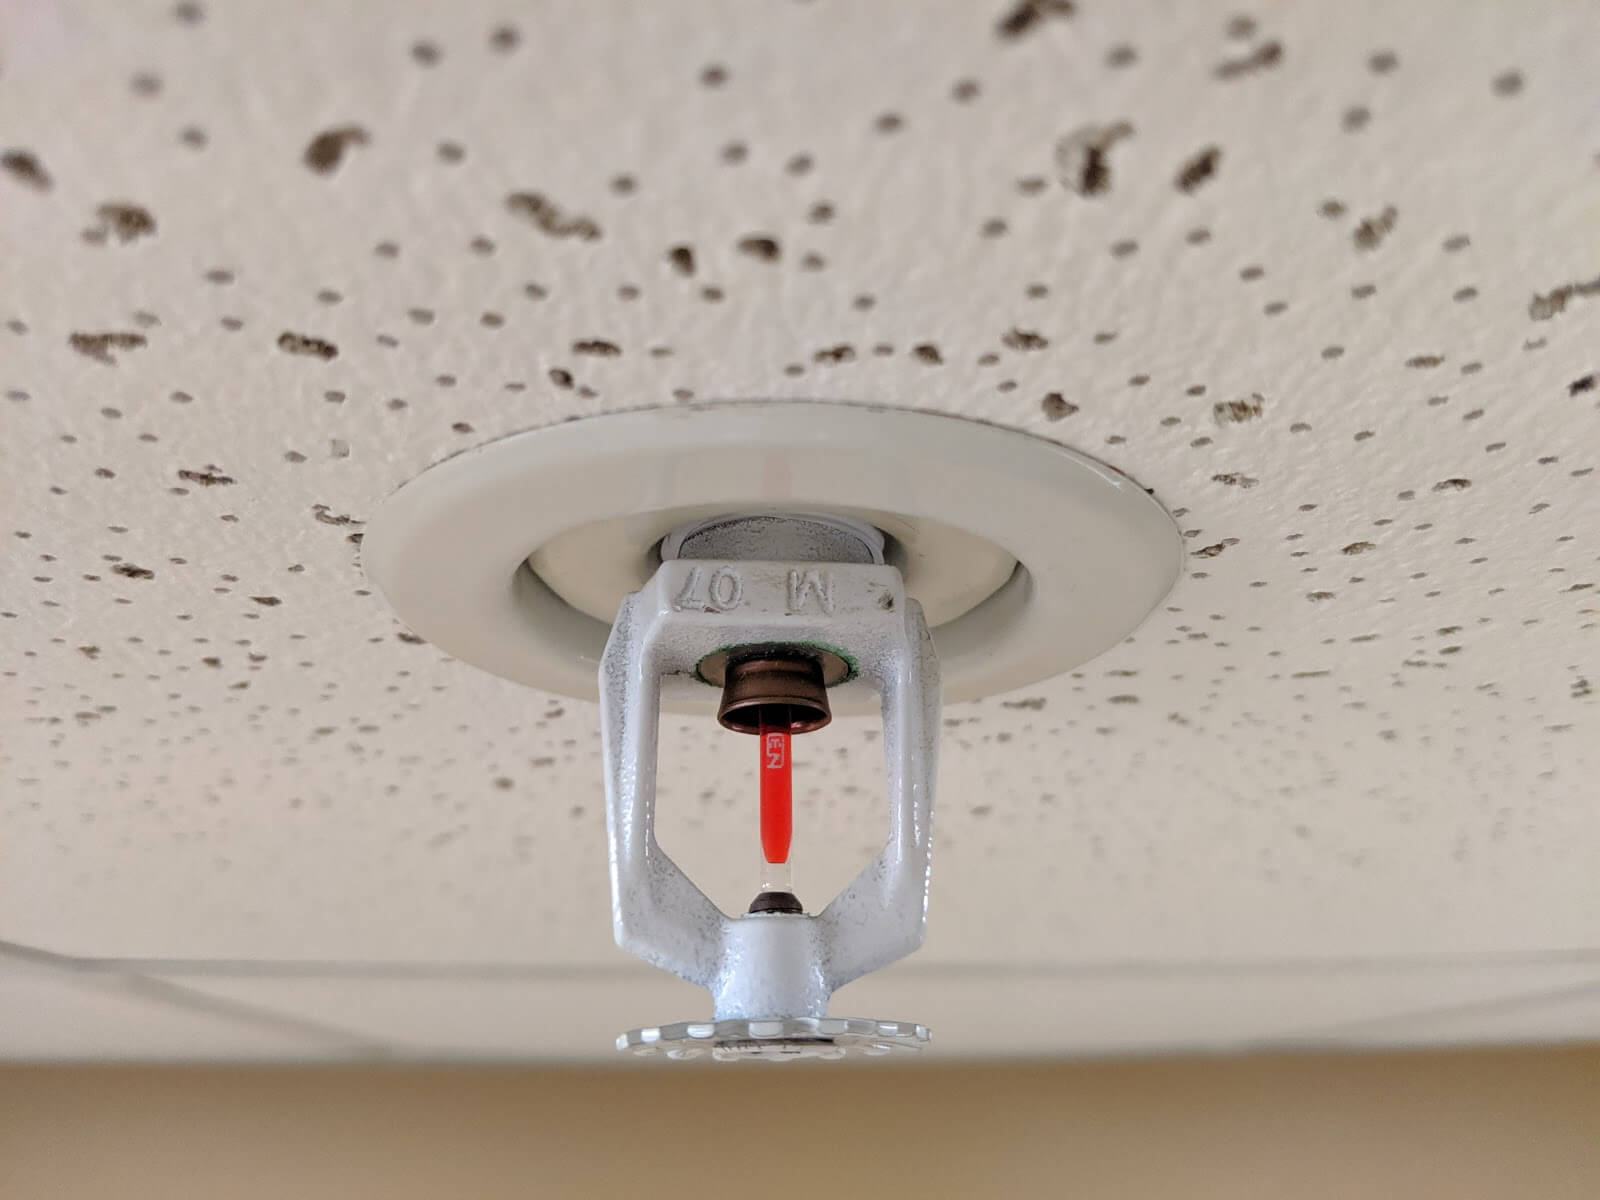 Need fire sprinkler repairs or corrections